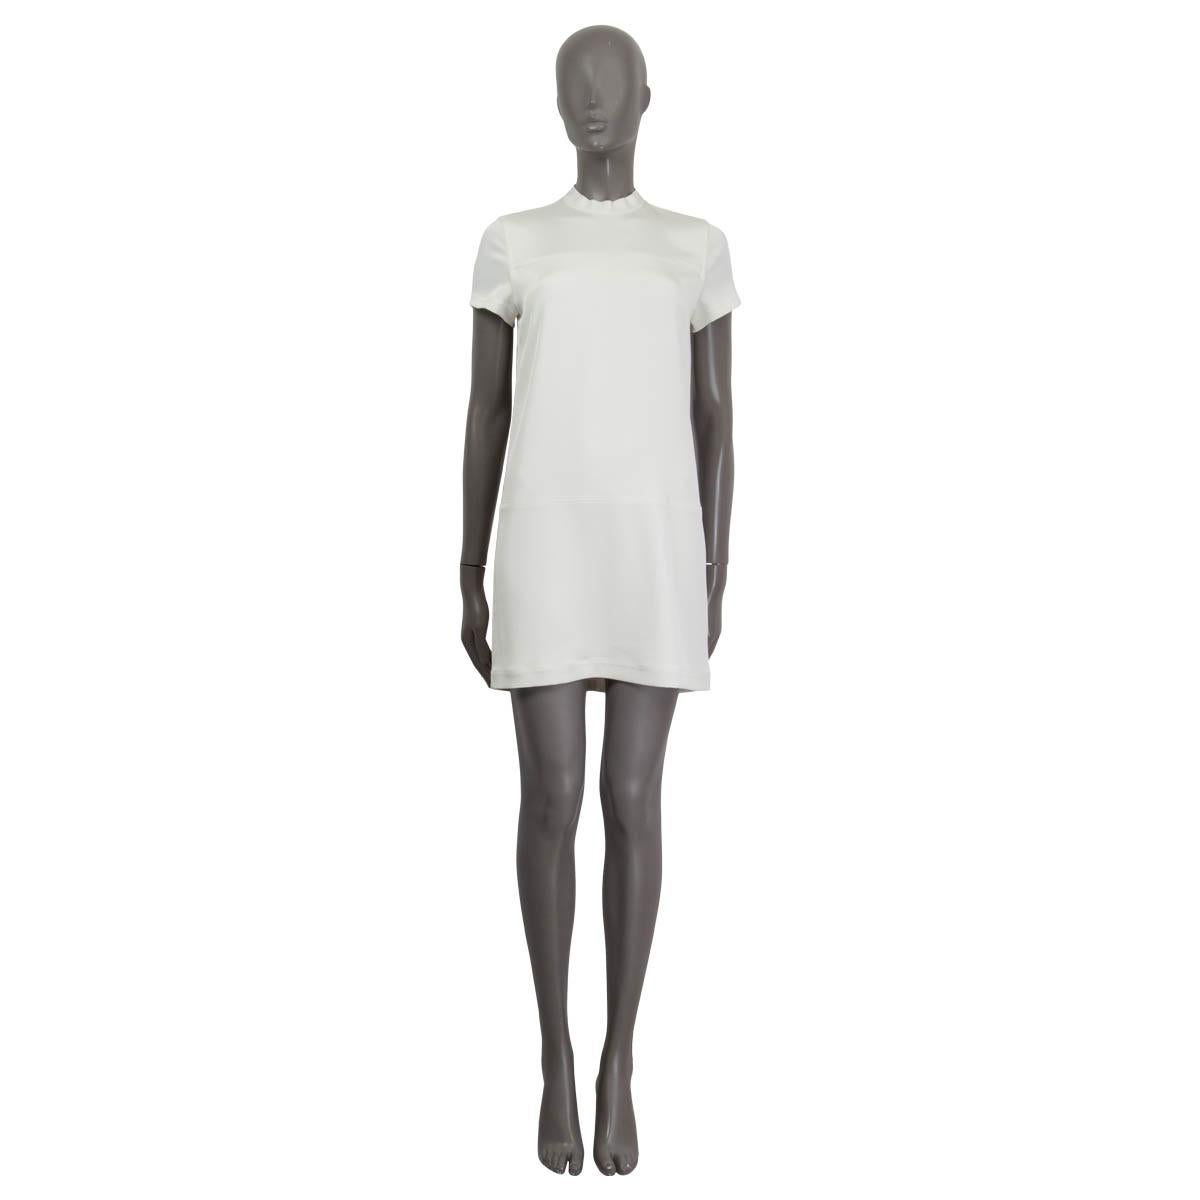 100% authentic T Alexander Wang short sleeve paneled dress in white triacetate (75%) and polyester (25%). Opens with a zipper on the back. Lined in white polyester (100%). Has been worn and is in excellent condition.

Measurements
Tag